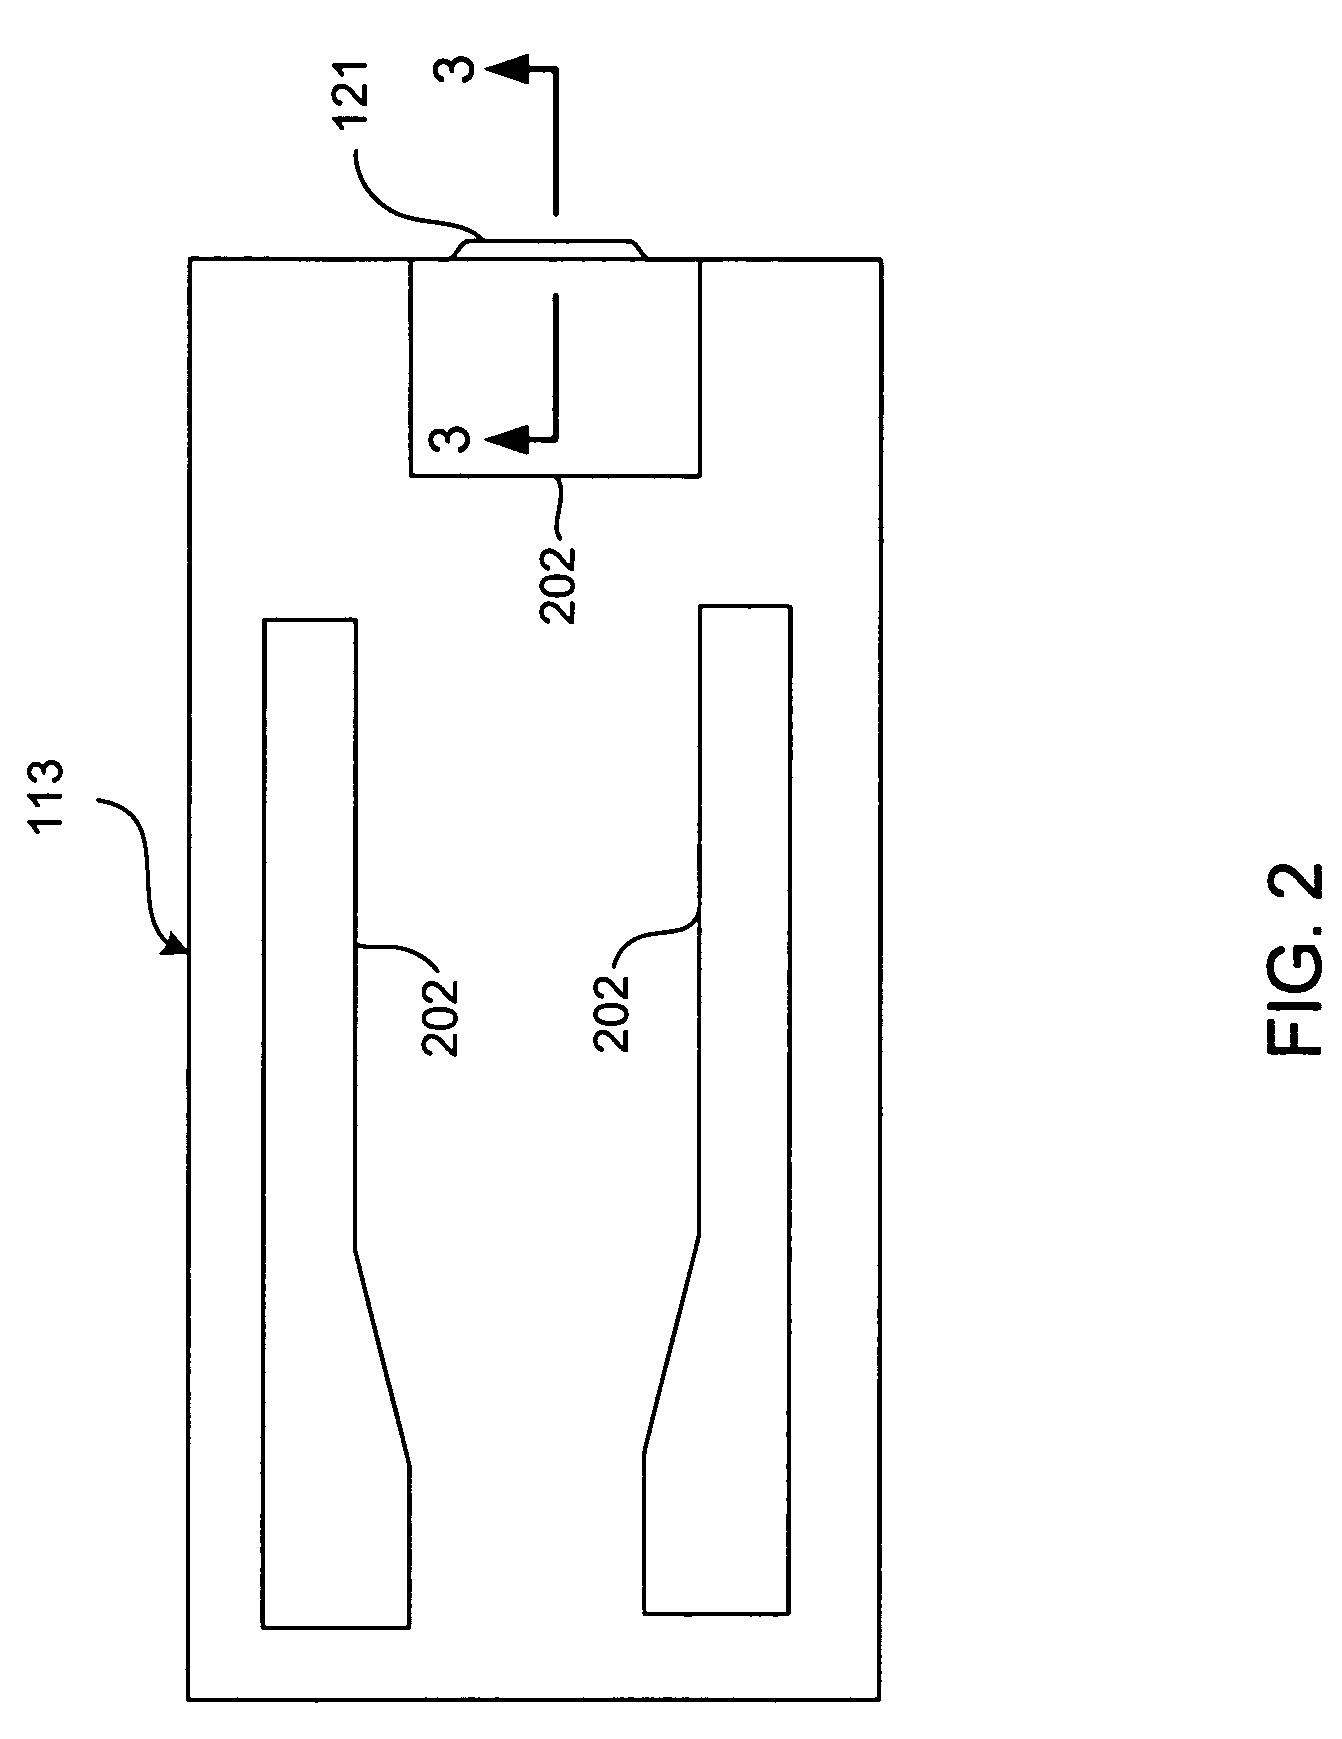 Dual polarity bias for prolonging the life of a heating element in magnetic data storage devices